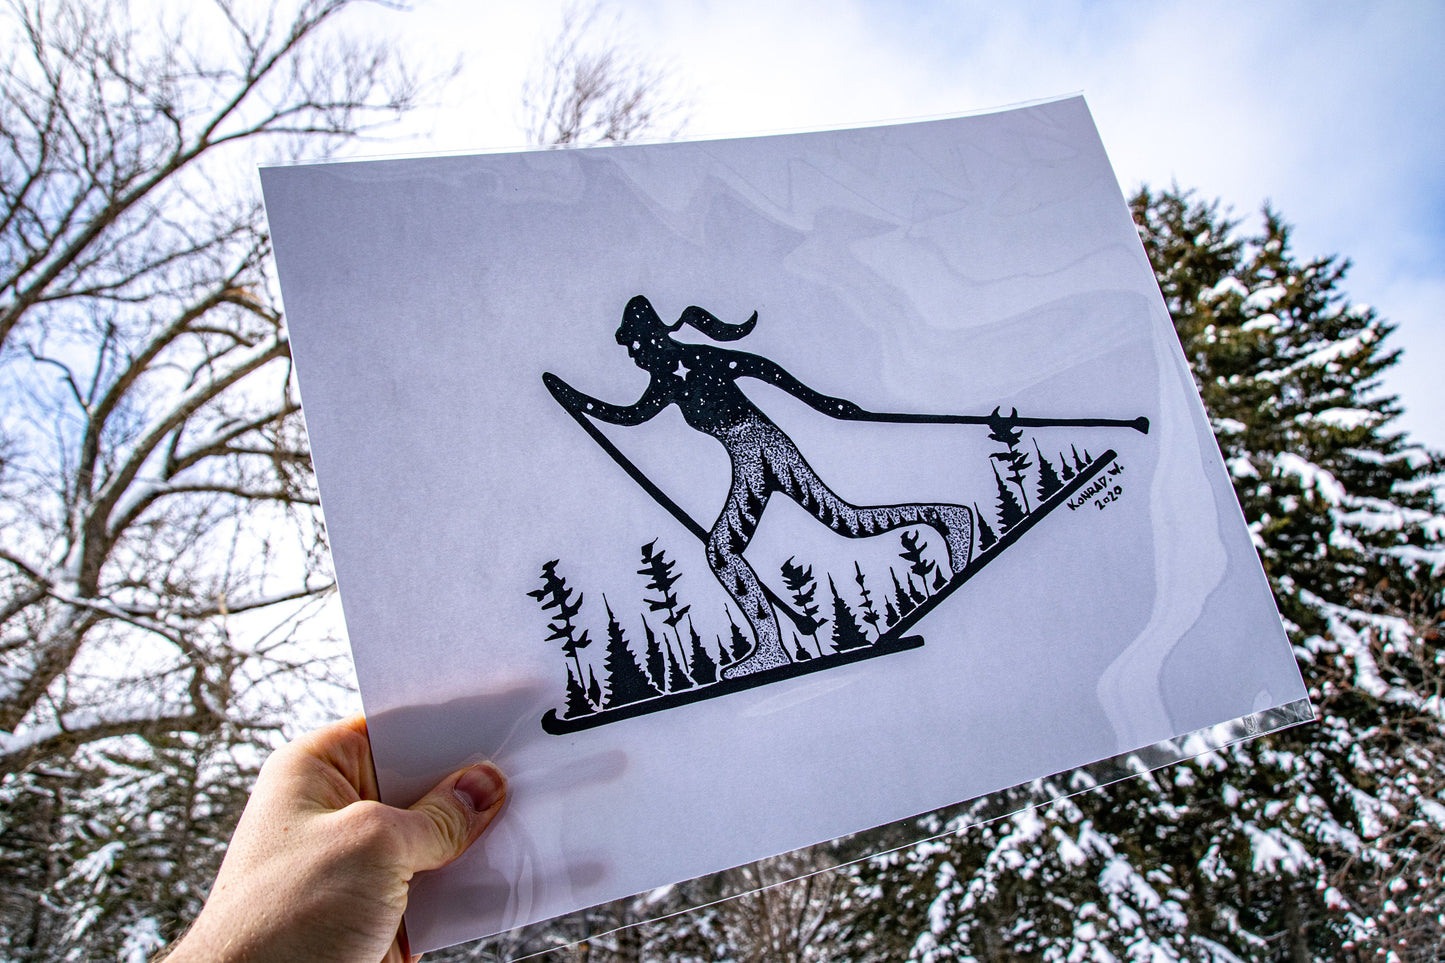 Female Nordic Skier - Pen and Ink PRINT